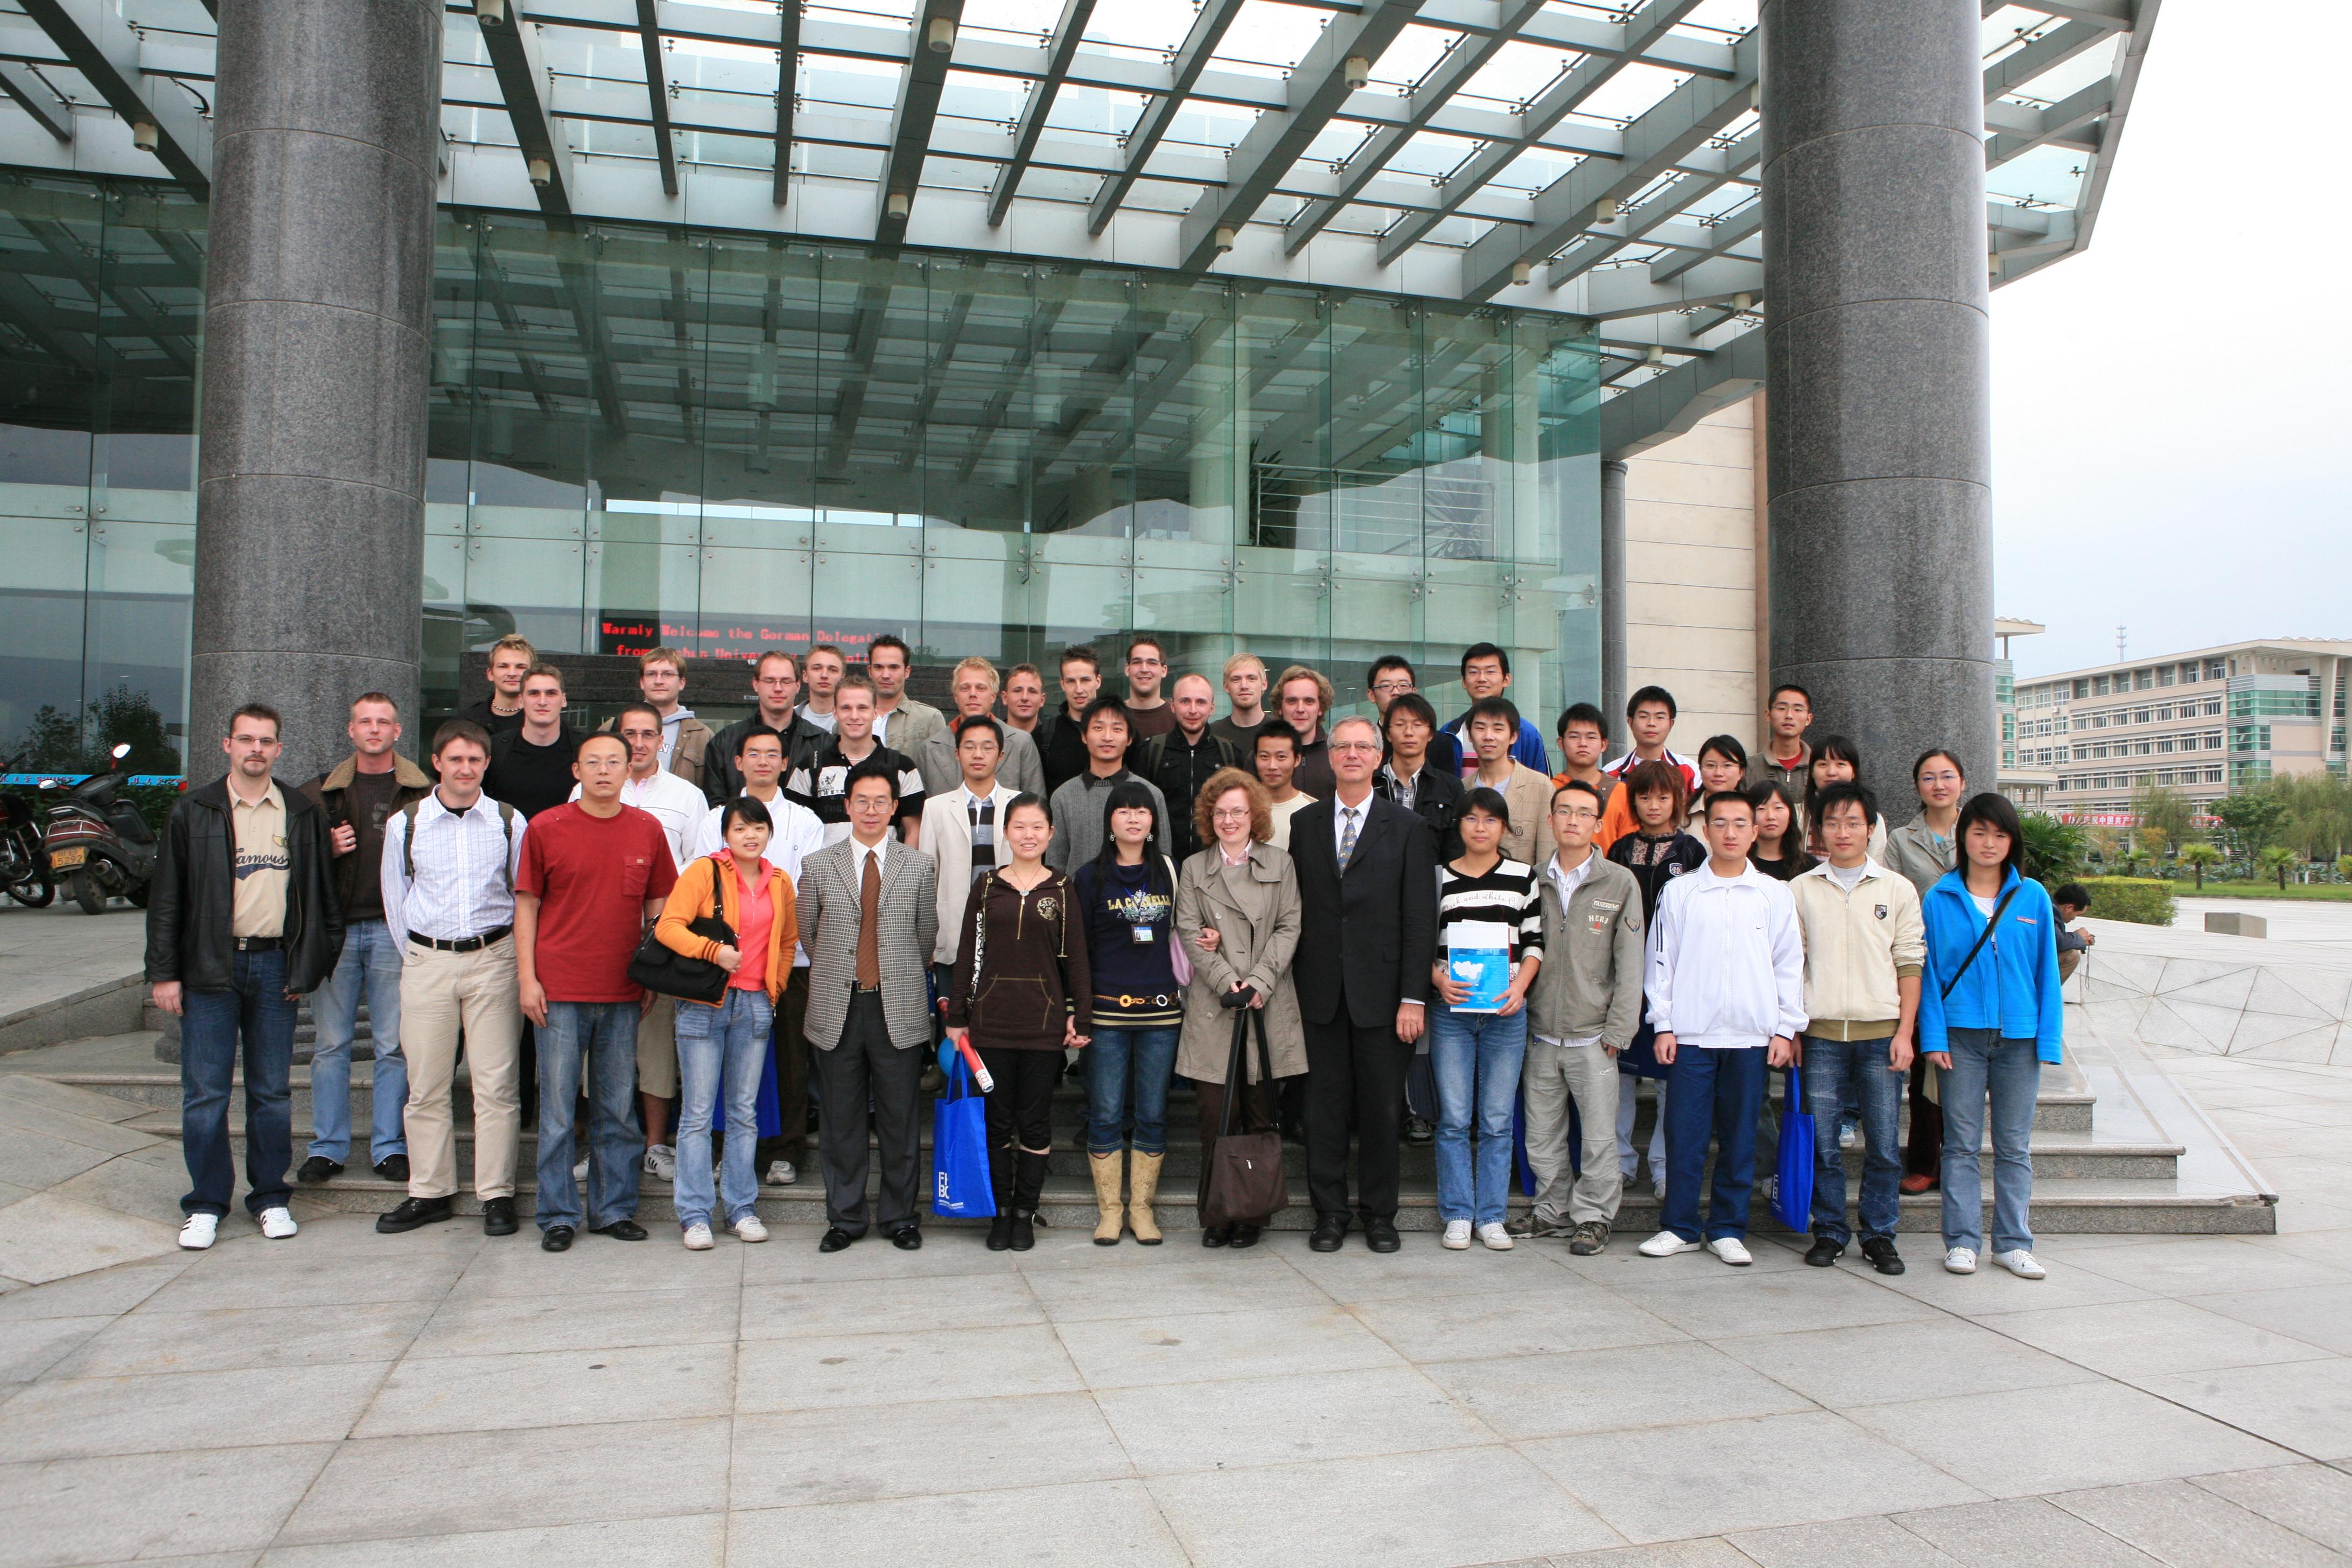 The  Student's  Delegation  from  Bochum  University  of  Applied  Sciences  of  Germany  paid  a  4-day  visit  to